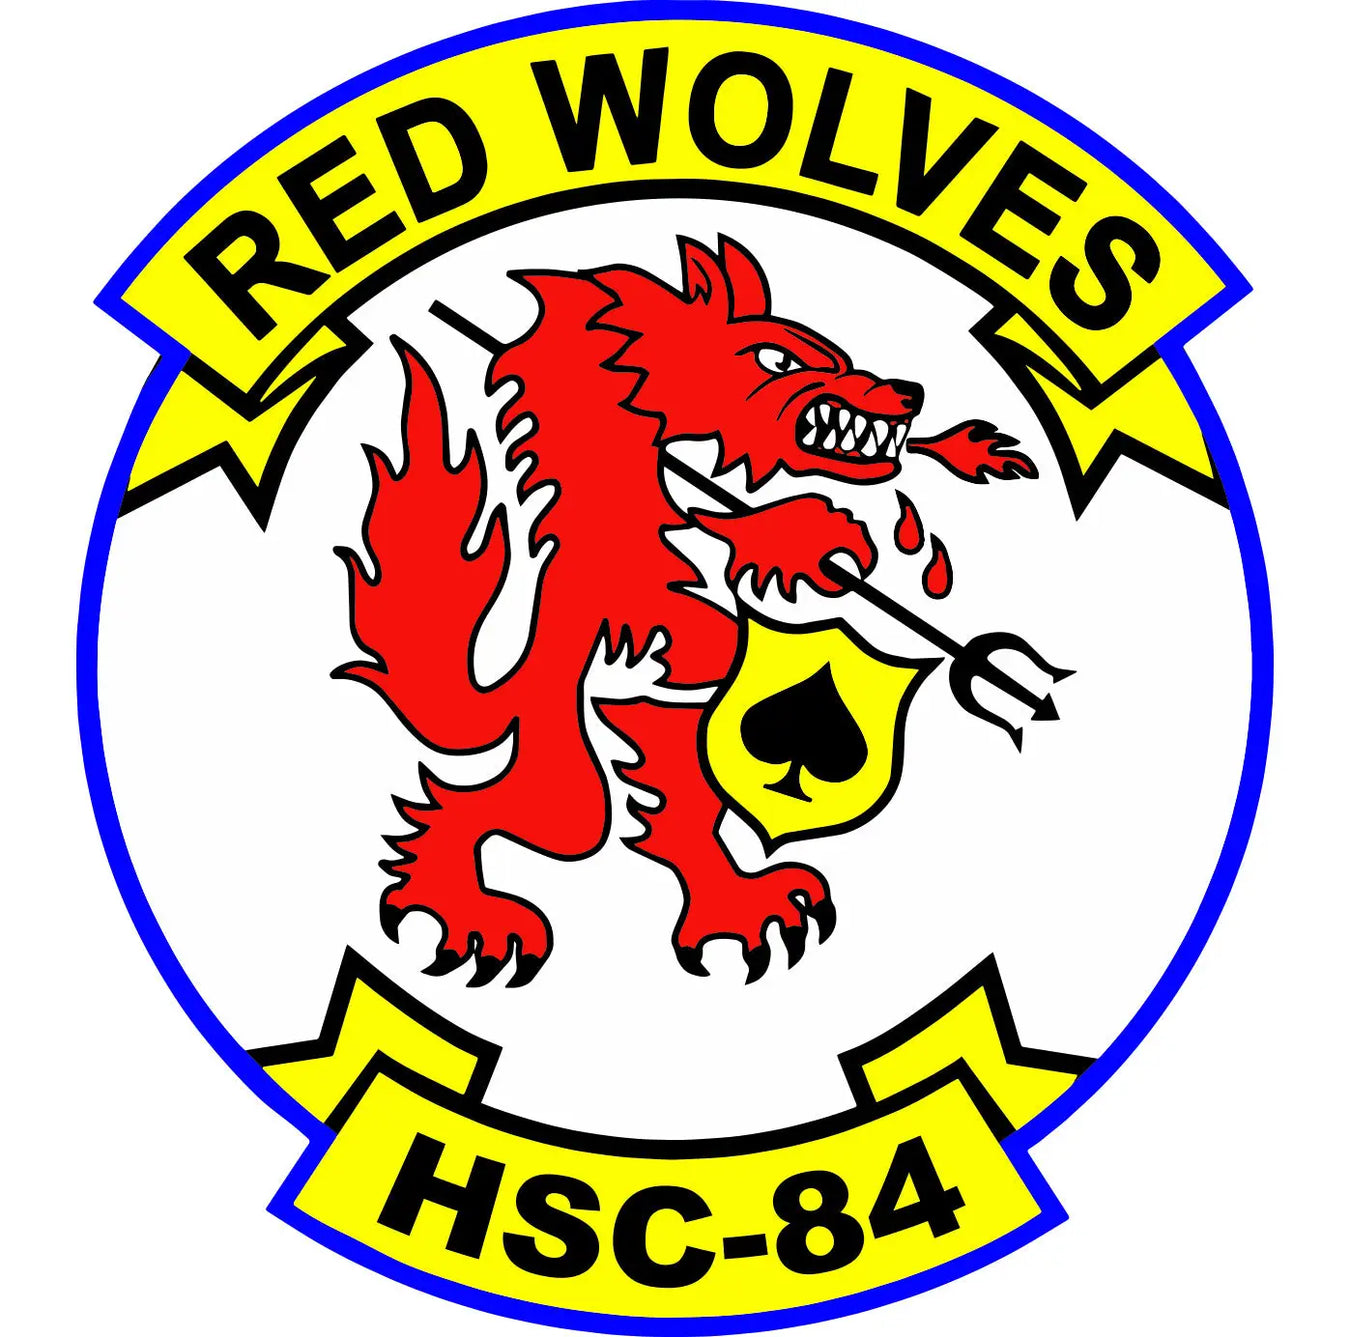 Helicopter Sea Combat Squadron 84 (HSC-84) Red Wolves